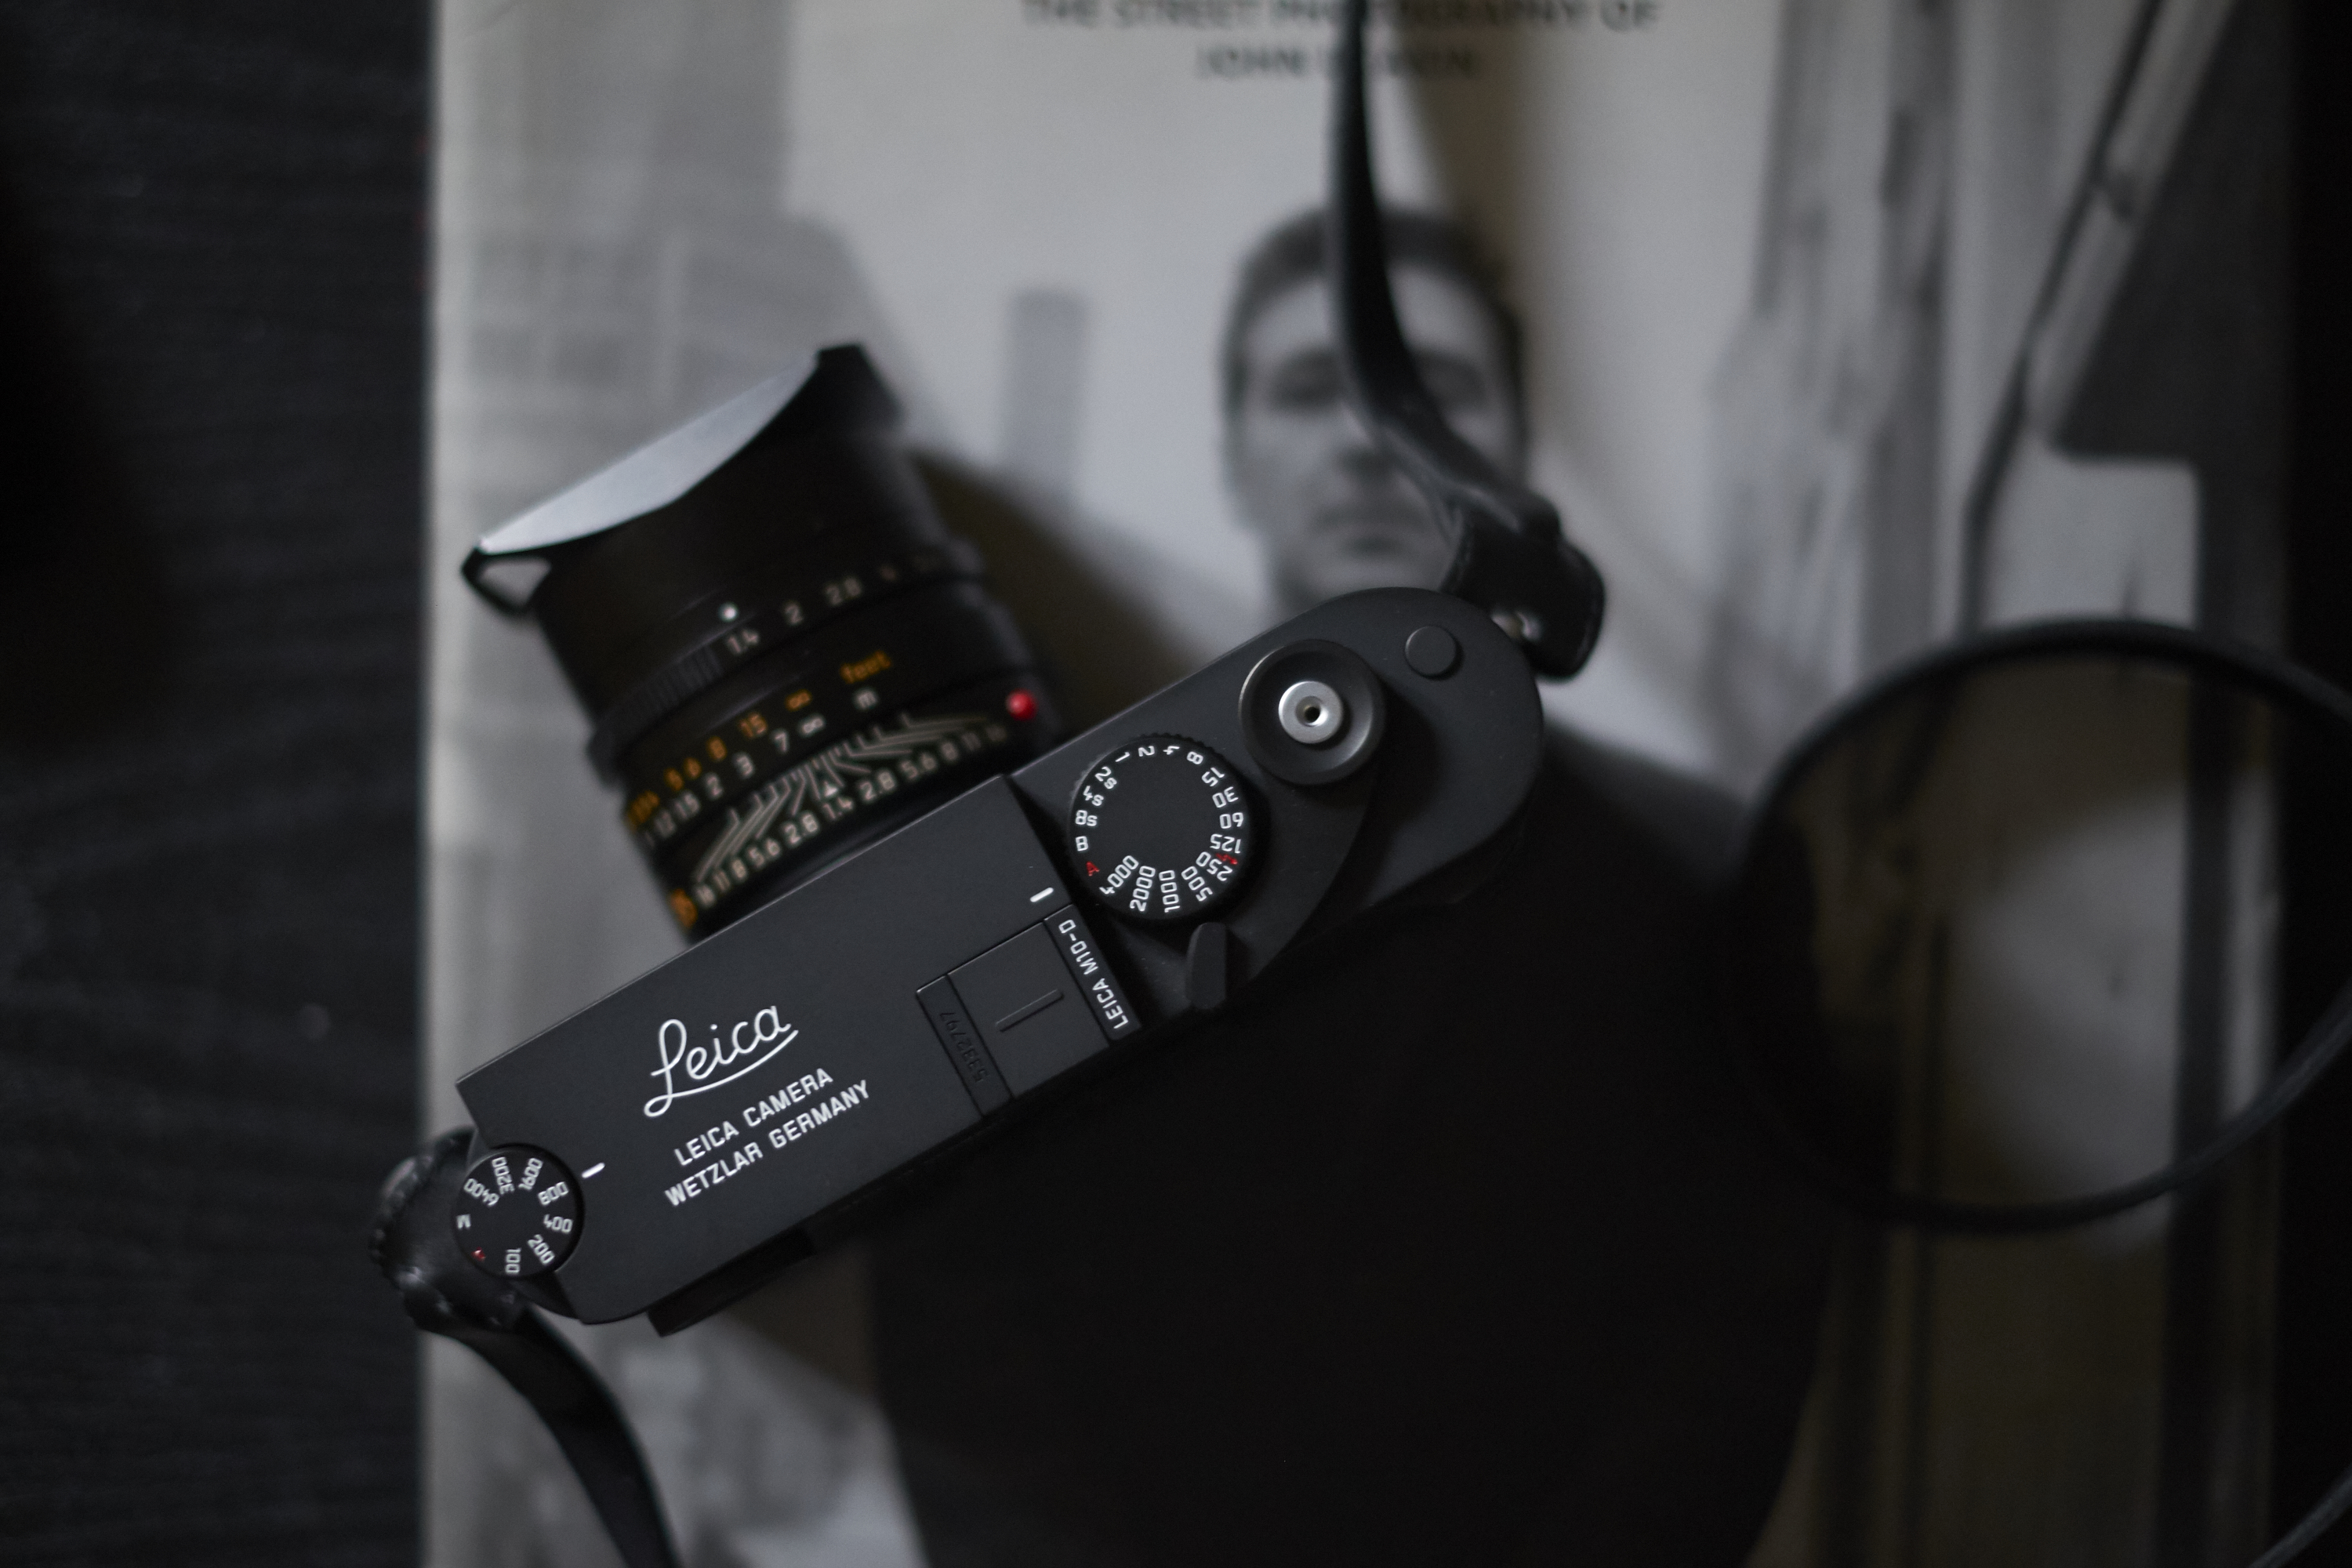 I Told Myself I Wouldn’t Buy Another Leica, But I Was Stupid to Say So